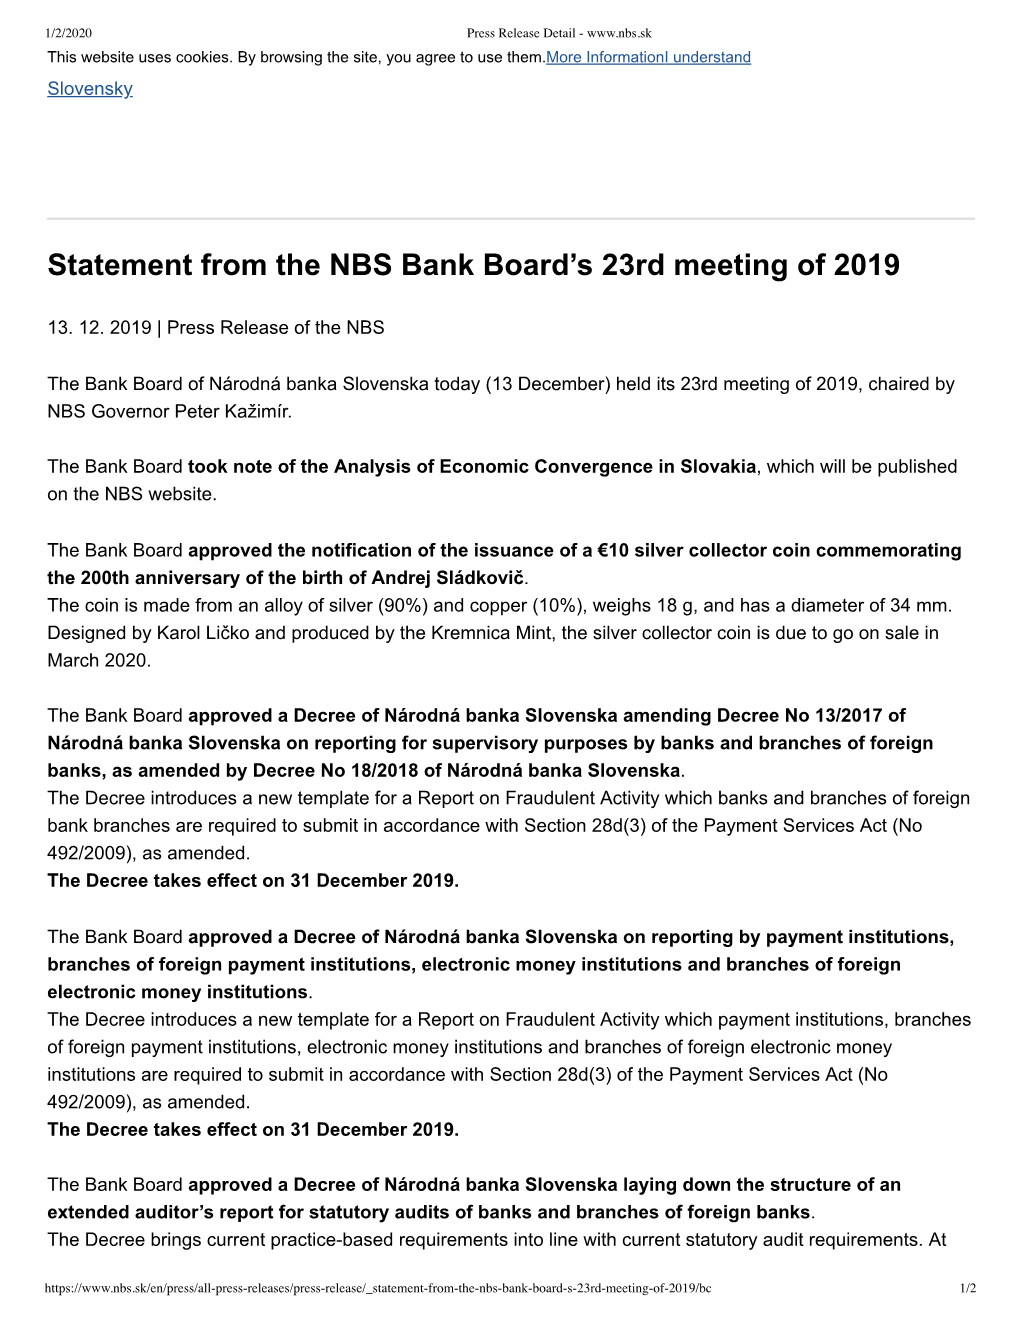 Statement from the NBS Bank Board's 23Rd Meeting of 2019